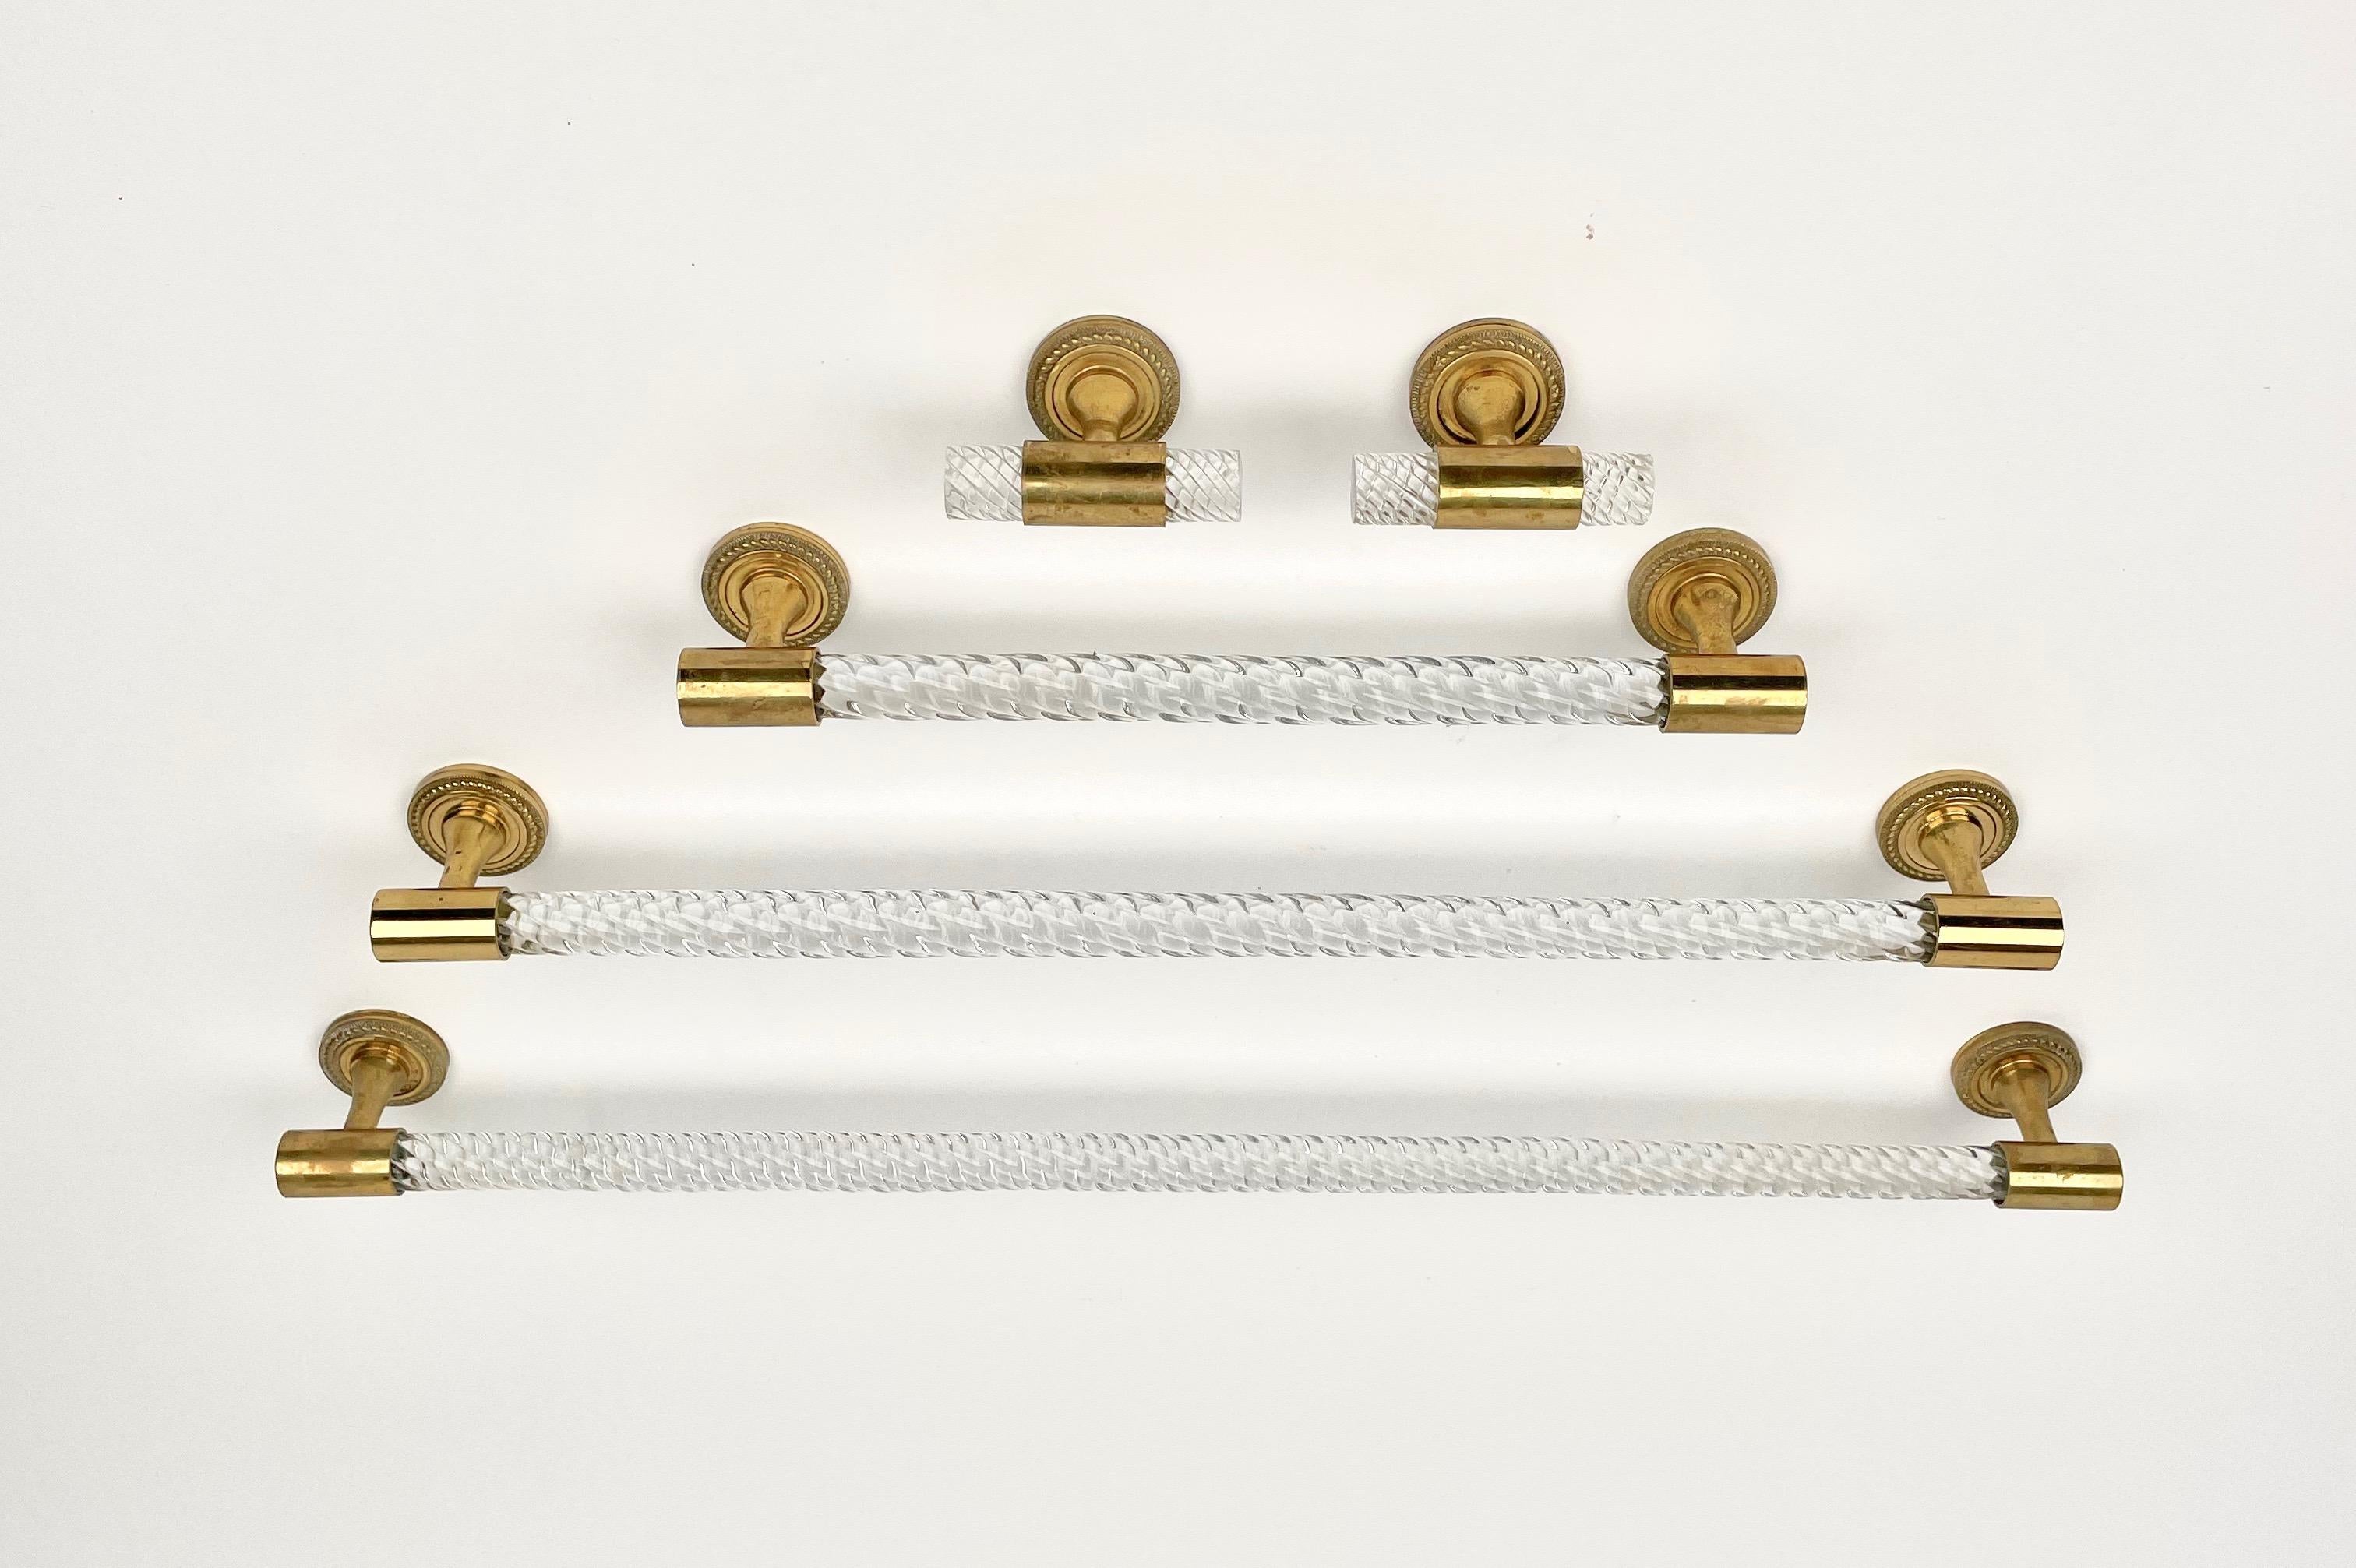 Bathroom set of towel holders in transparent Murano glass and brass details made in Italy in the 1950s.

Dimensions: l
Width 62, Height 2.5, Depth 6.5 cm.
Width 54, Height 2.5, Depth 6.5 cm.
Width 32, Height 2.5, Depth 6.5 cm.
Width 8, Height